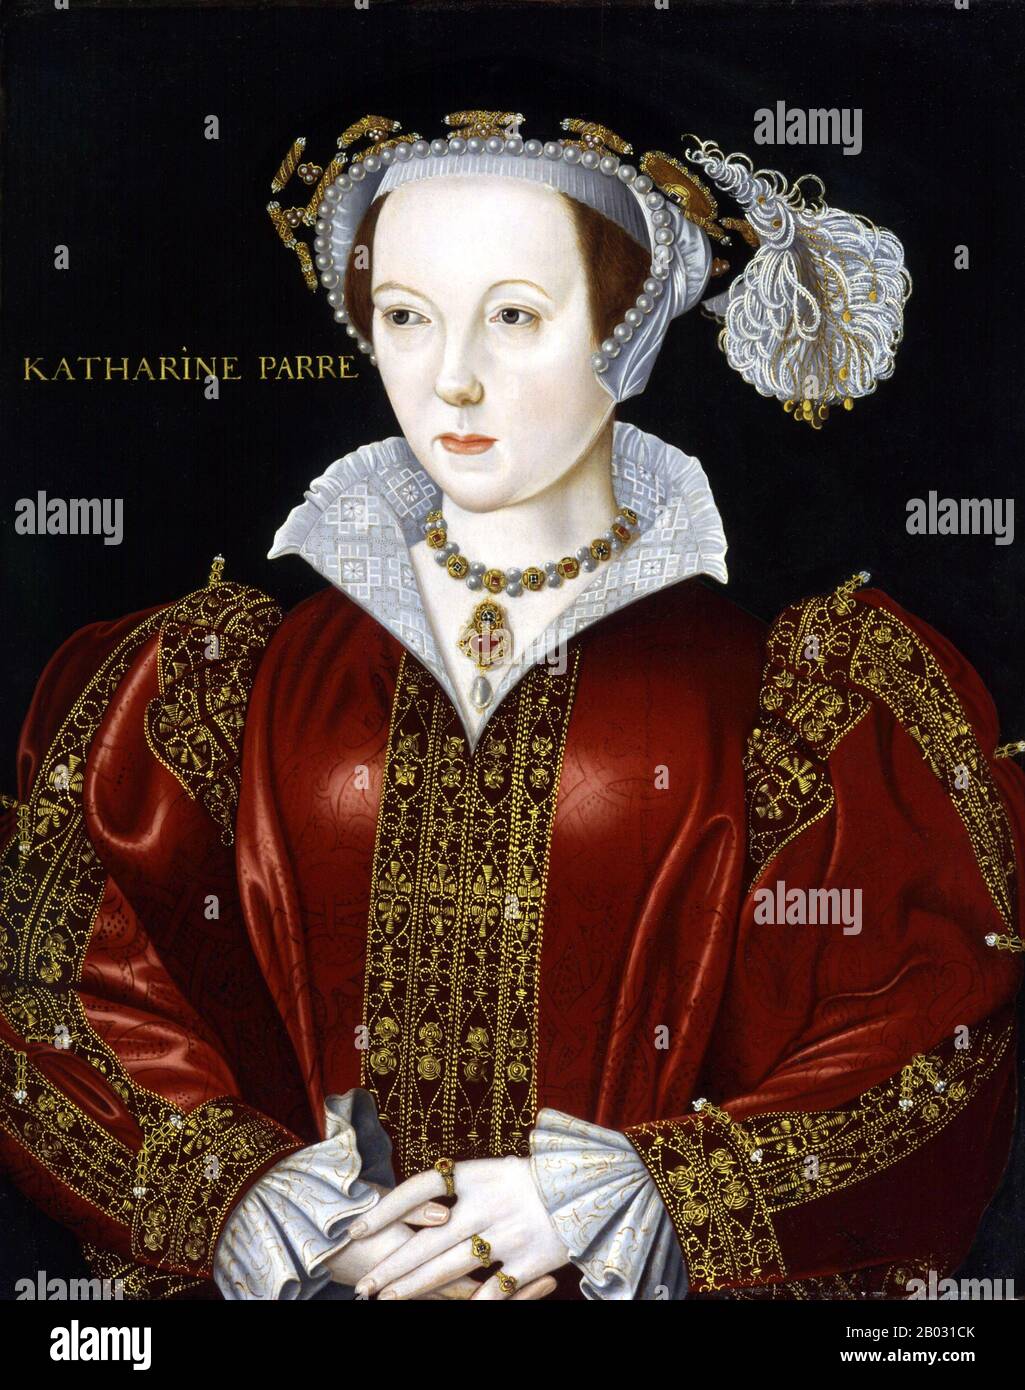 Catherine Parr (alternatively spelled Katherine or Kateryn) (1512 – 5 September 1548) was Queen of England and of Ireland (1543–47) as the last of the six wives of King Henry VIII. She married him on 12 July 1543, and outlived him by one year. She was also the most-married English queen, with four husbands.  Catherine enjoyed a close relationship with Henry's three children and was personally involved in the education of Elizabeth and Edward, both of whom became English monarchs. She was influential in Henry's passing of the Third Succession Act in 1543 that restored both his daughters, Mary a Stock Photo